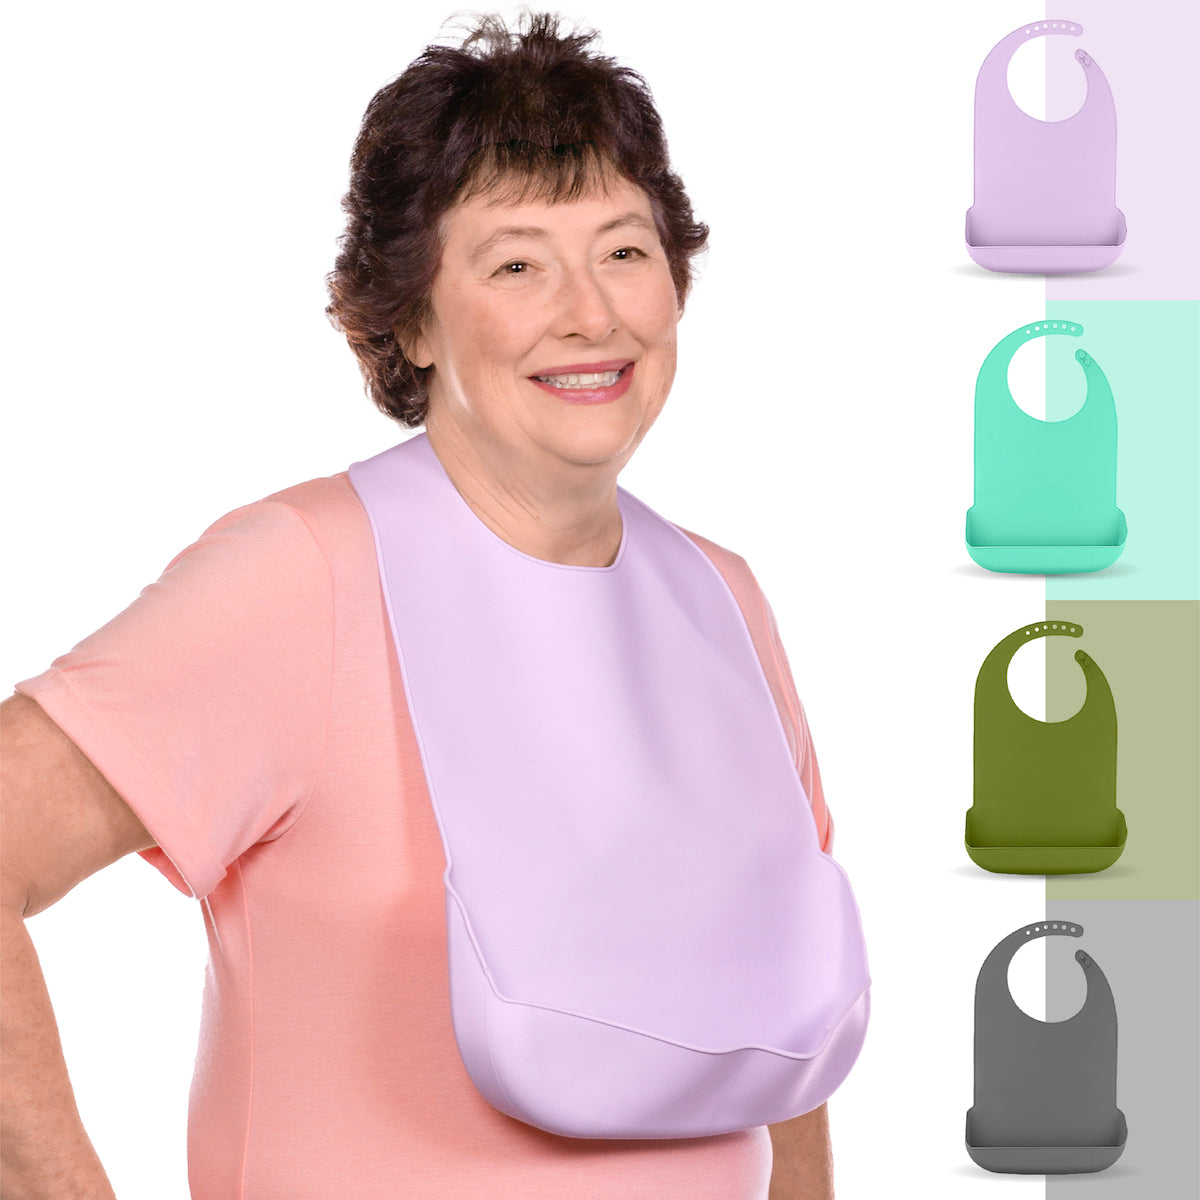 The BraceAbility Silicon Adult Bib is a washable clothing protector for elderly, disabled, and special needs